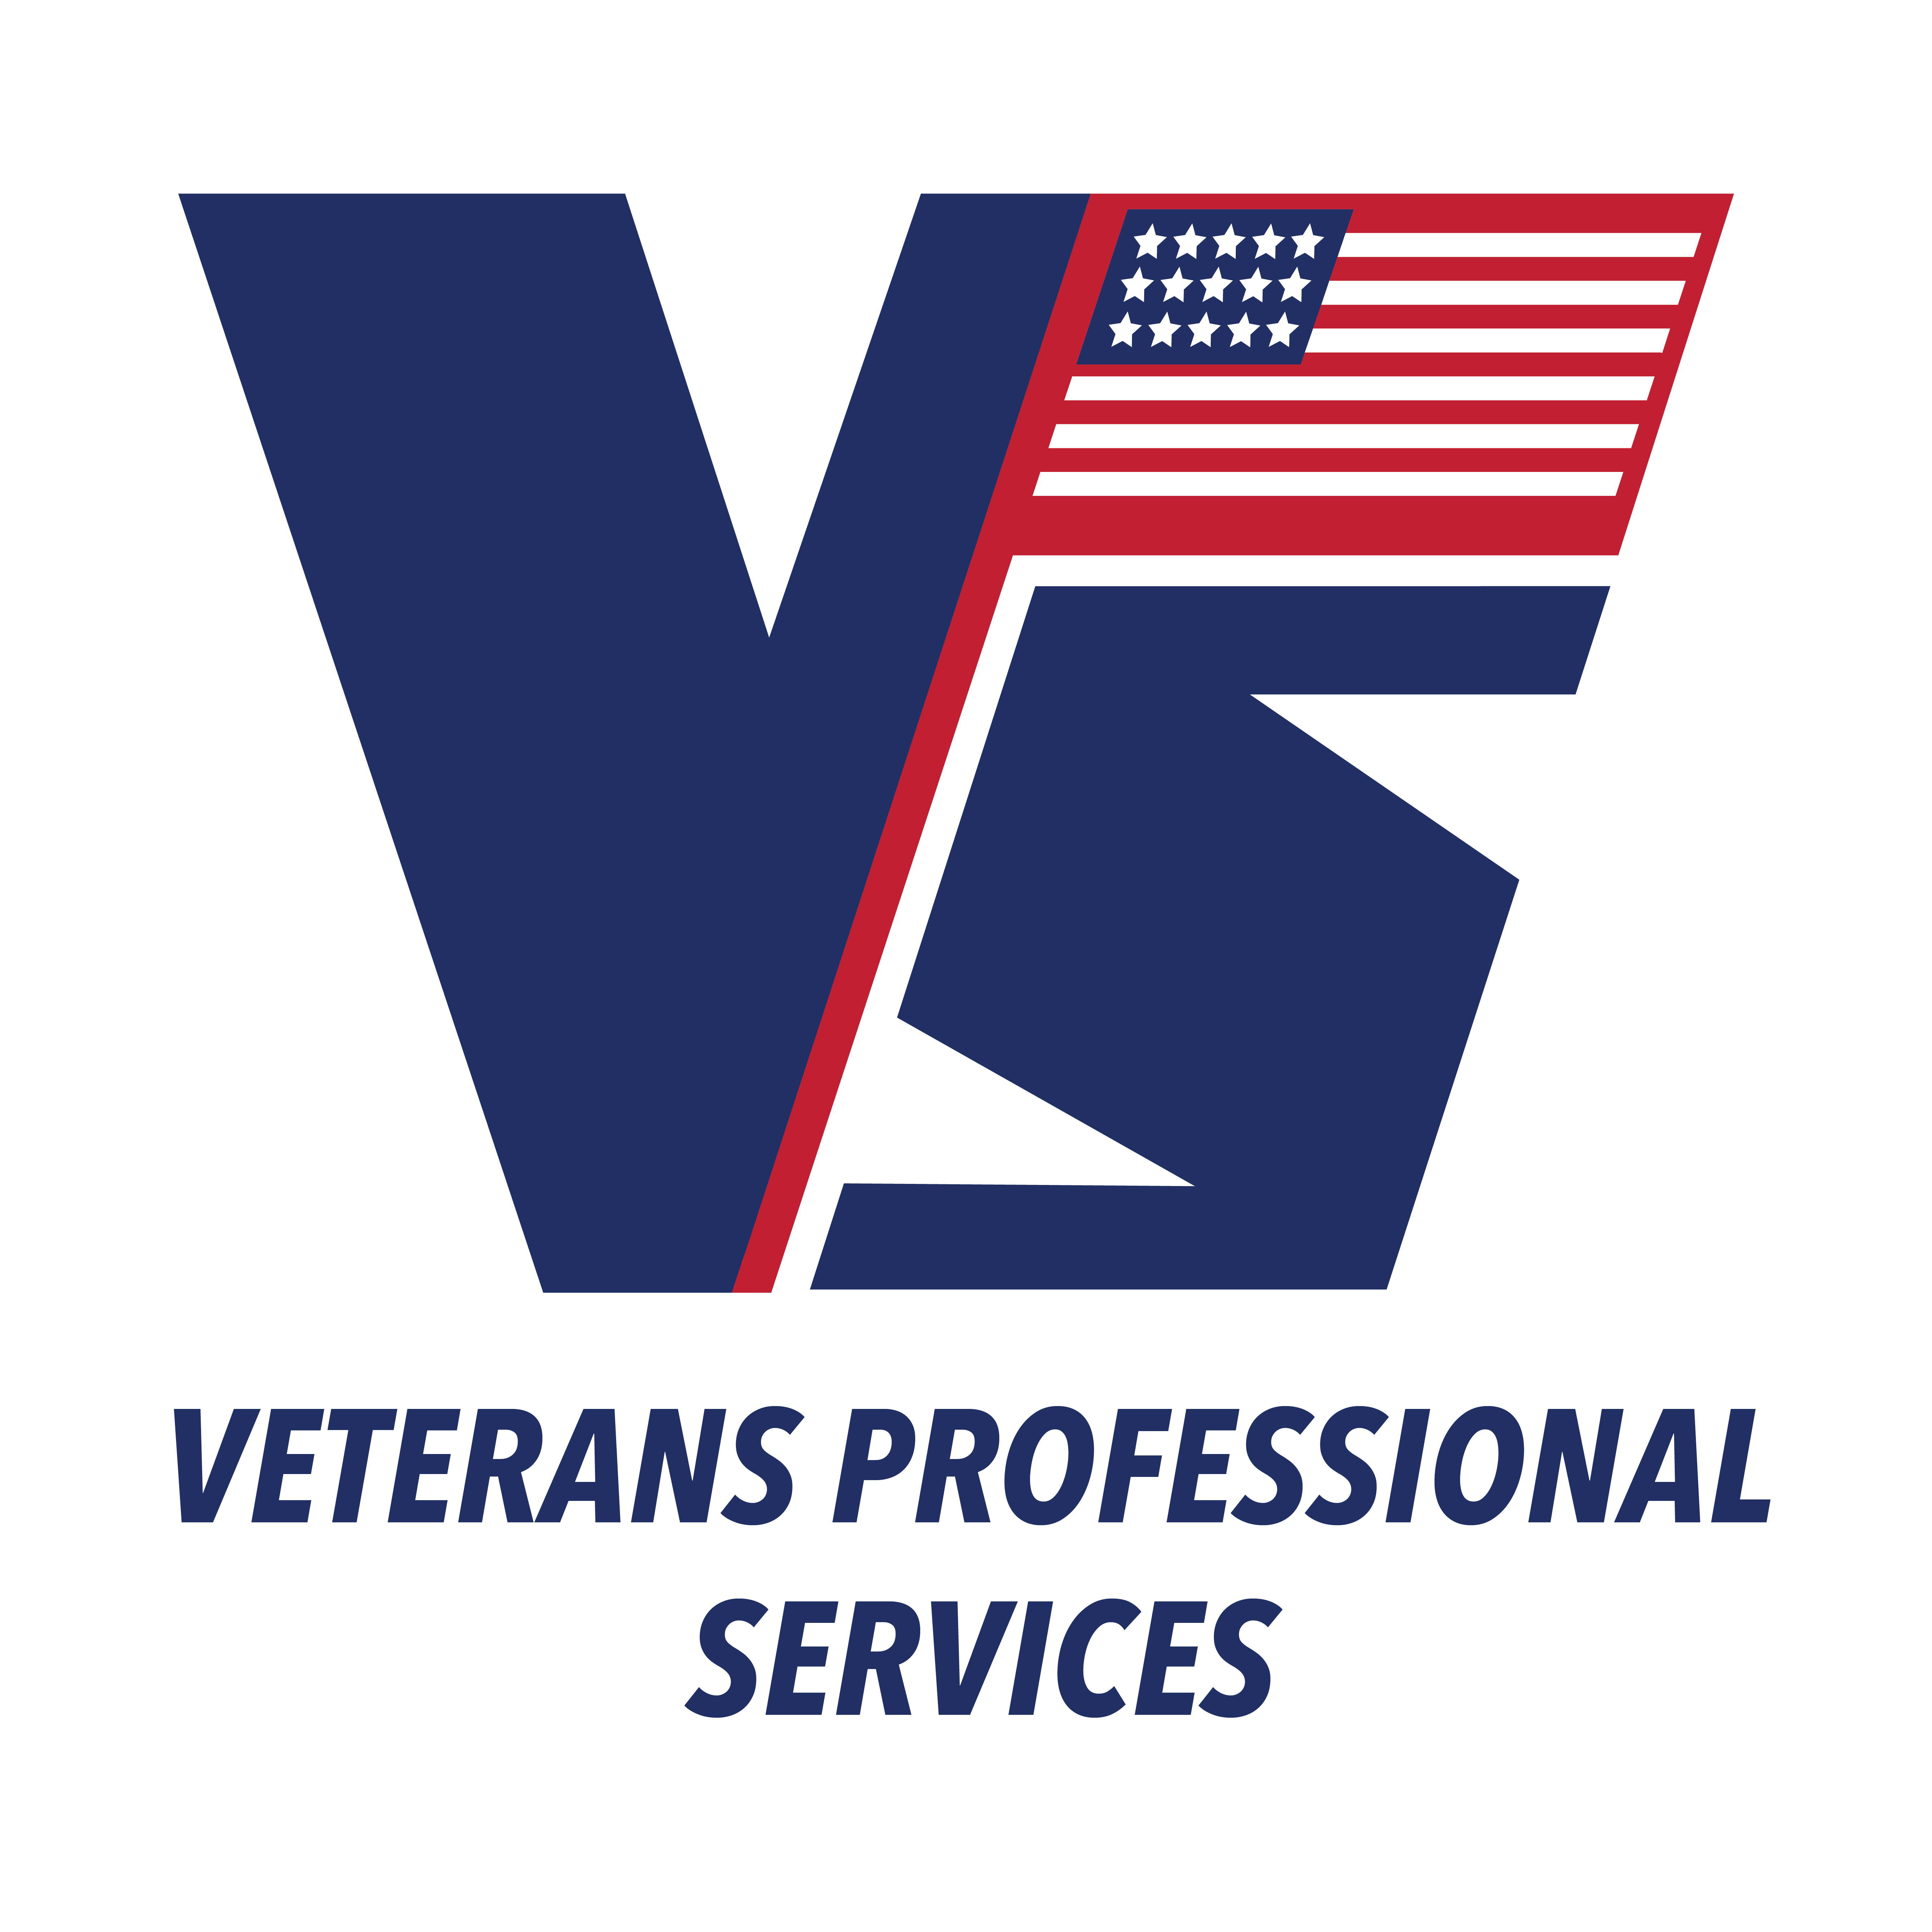 Welcome to Veterans Professional Services